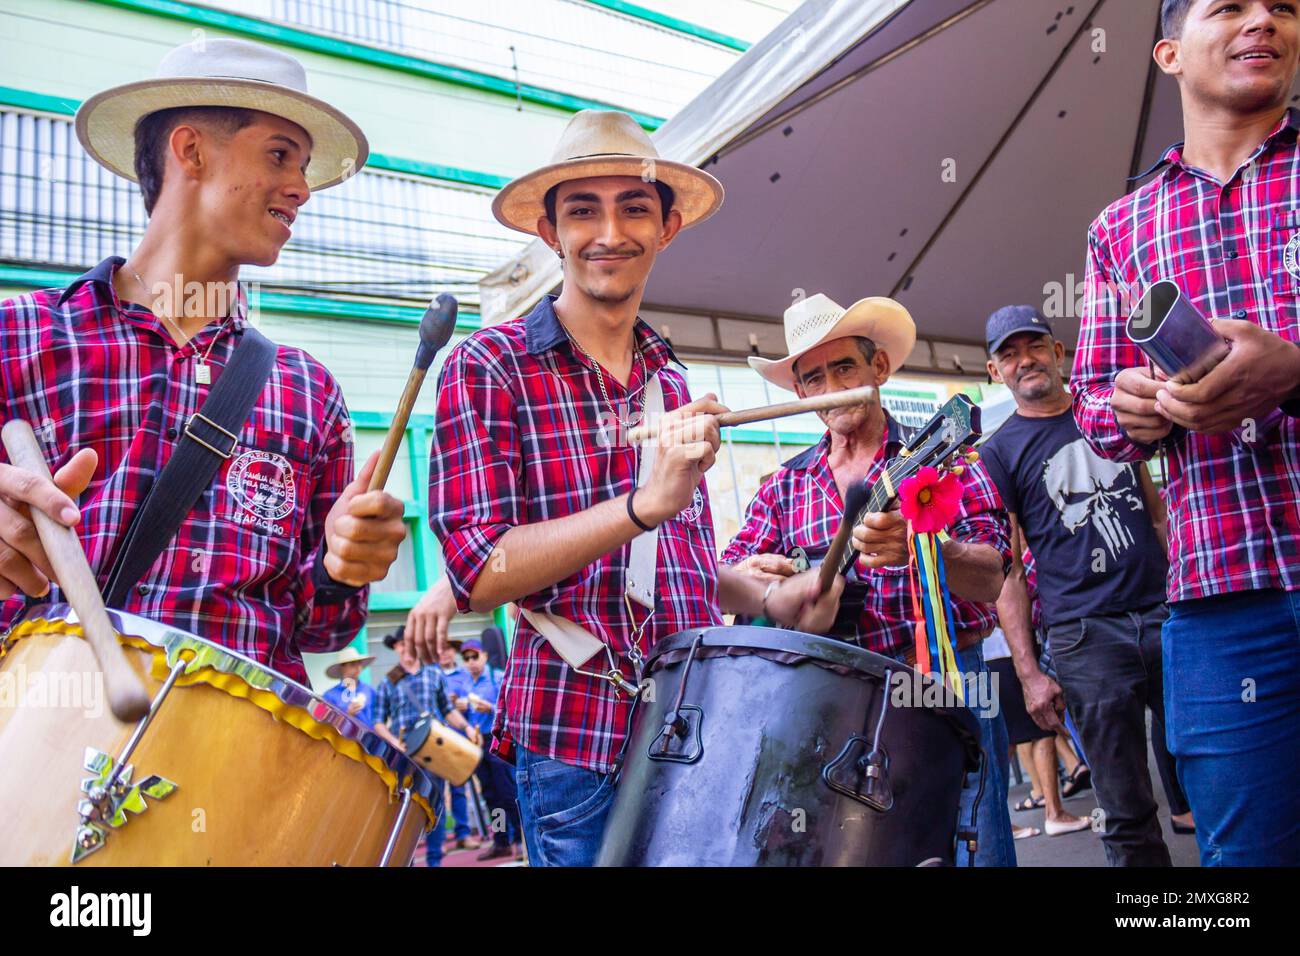 Goiania, Goias, Brazil – January 29, 2023: A group of people playing at the feast of the revelry of kings, a typical festival in Brazil. Stock Photo